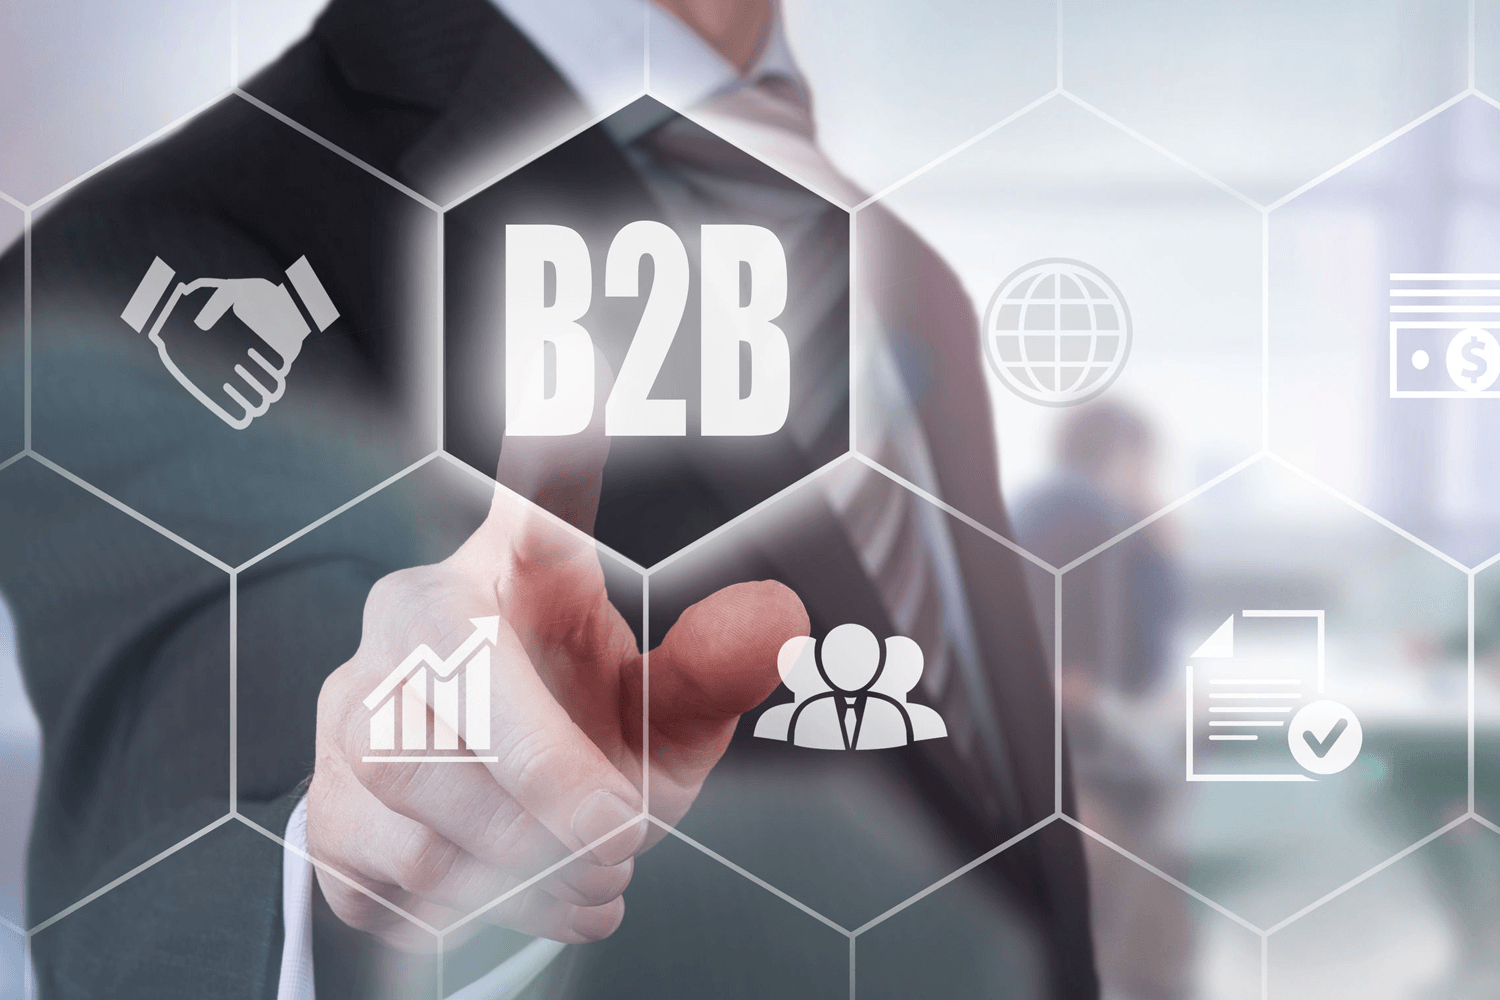 Measuring B2B PR - The Ultimate Tool For Business Success